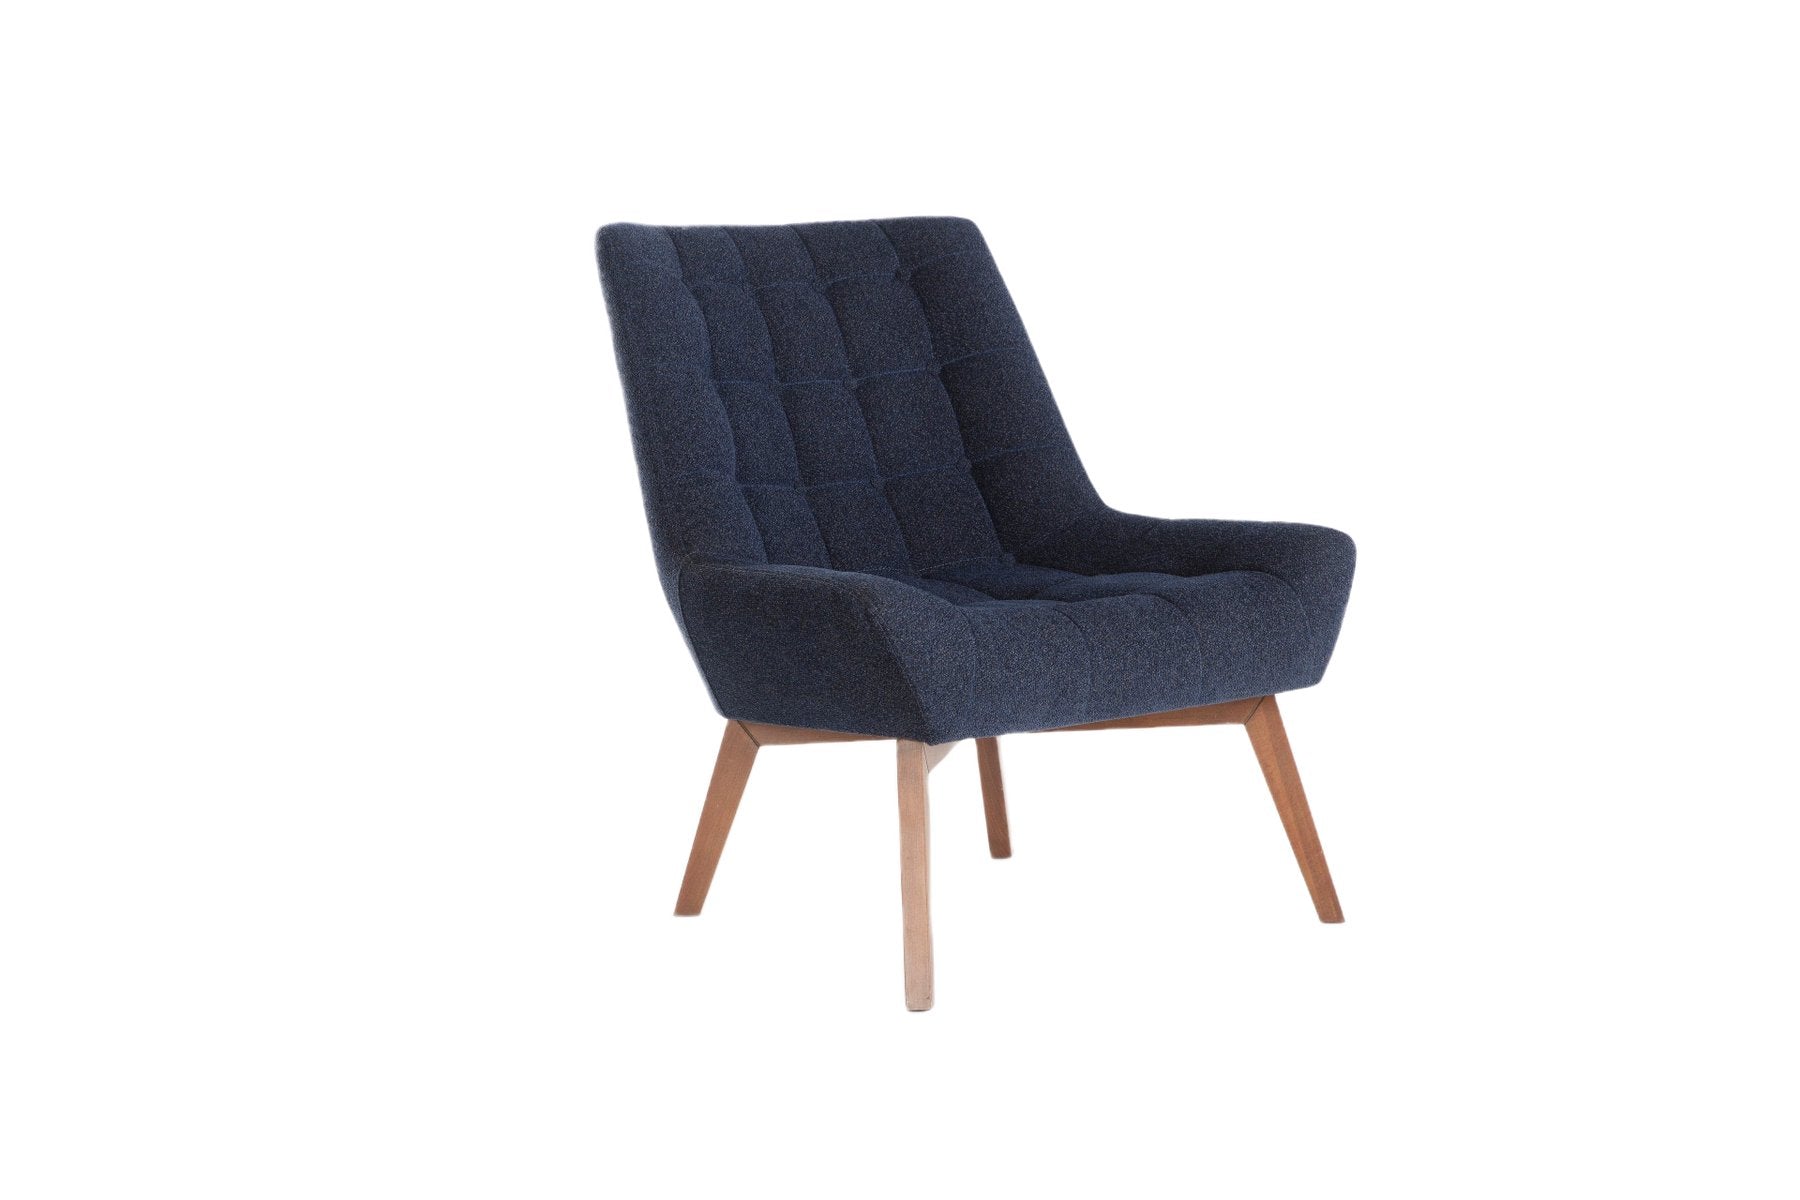 Revere Accent Chair by Bellona